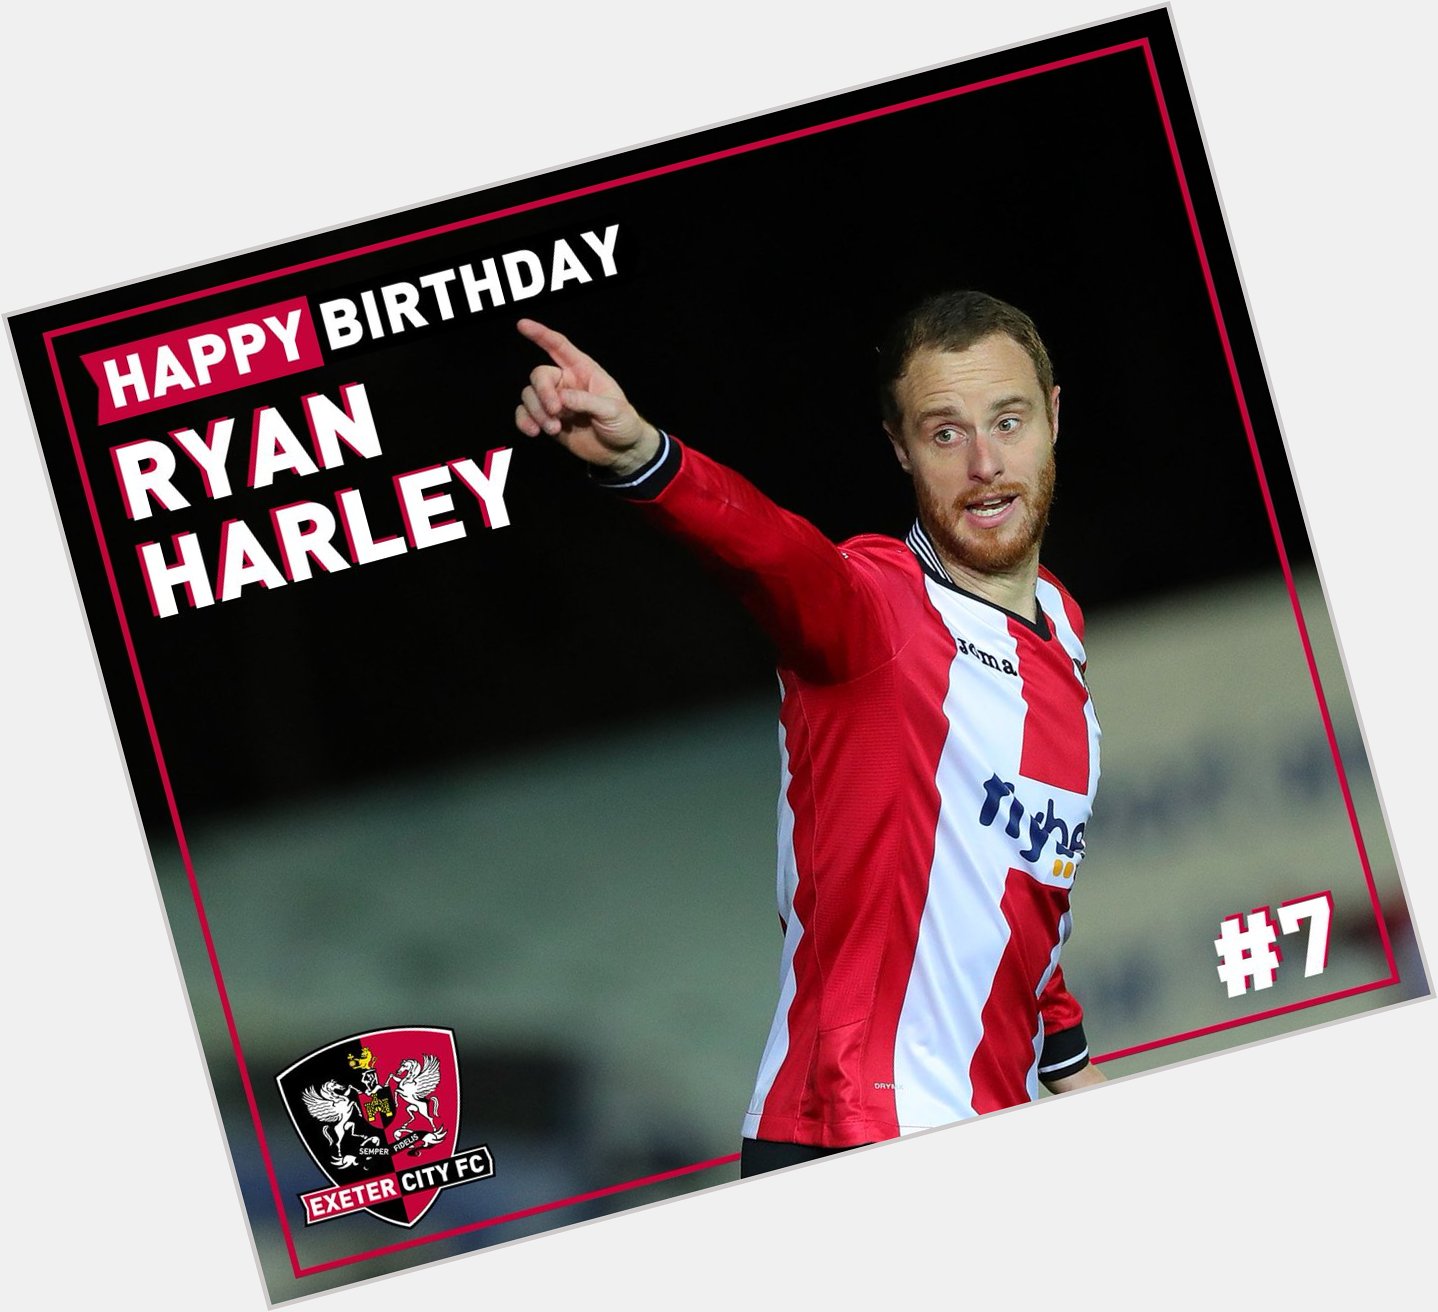  Happy Birthday to City\s midfield maestro Ryan Harley!

A little late, but hope you\ve had a great day! 